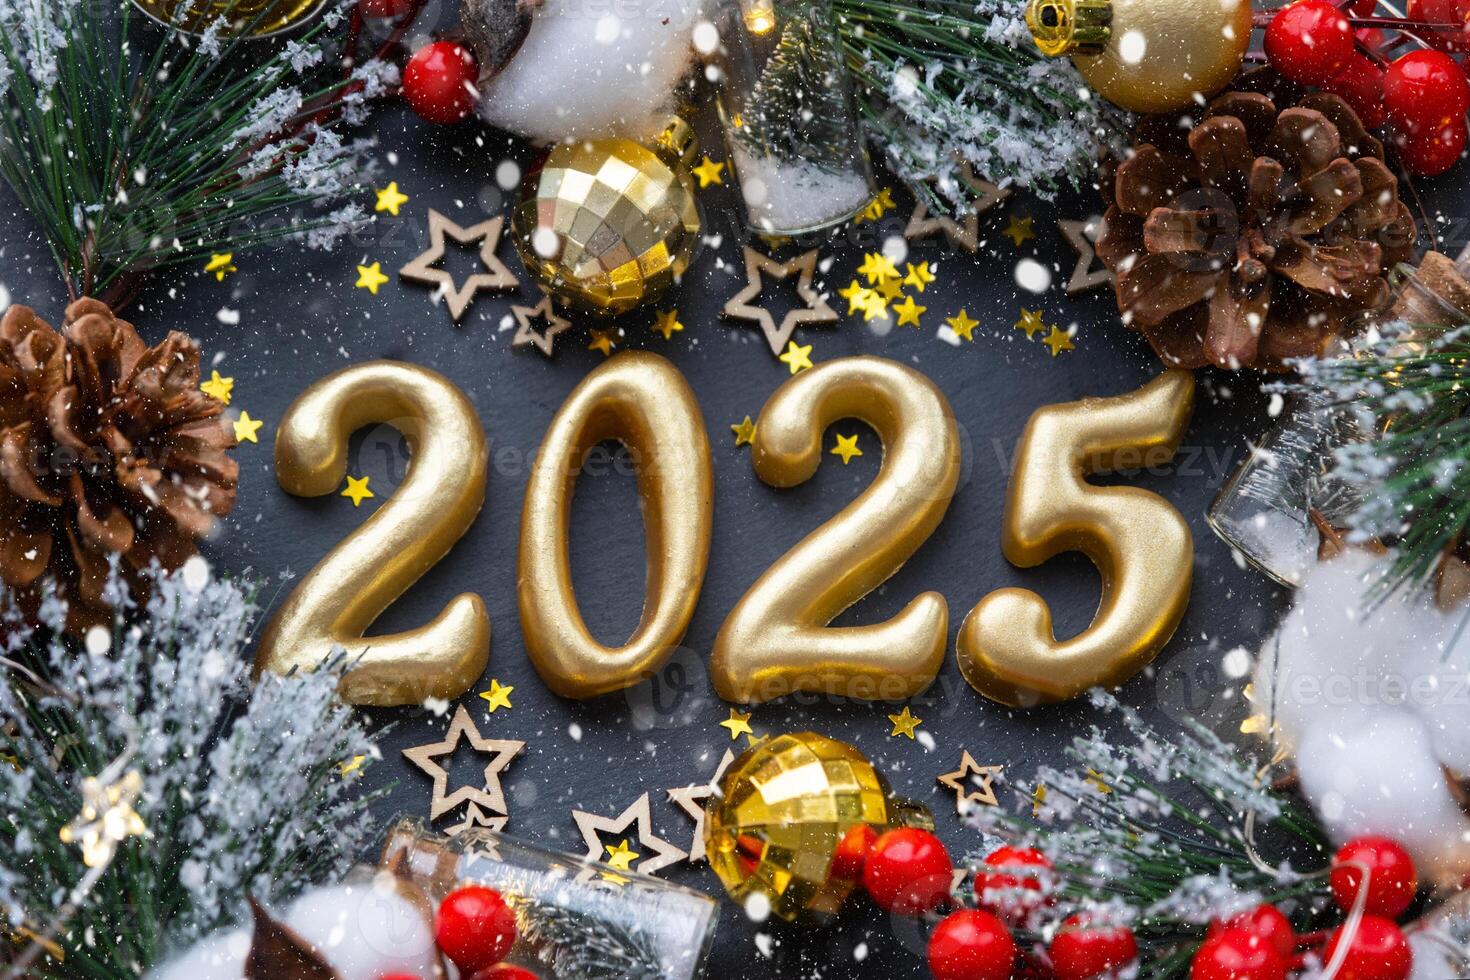 The golden figures 2025 made of candles on a black stone slate background are decorated with a festive decor of stars, sequins, fir branches, balls and garlands. Greeting card, happy New Year. photo